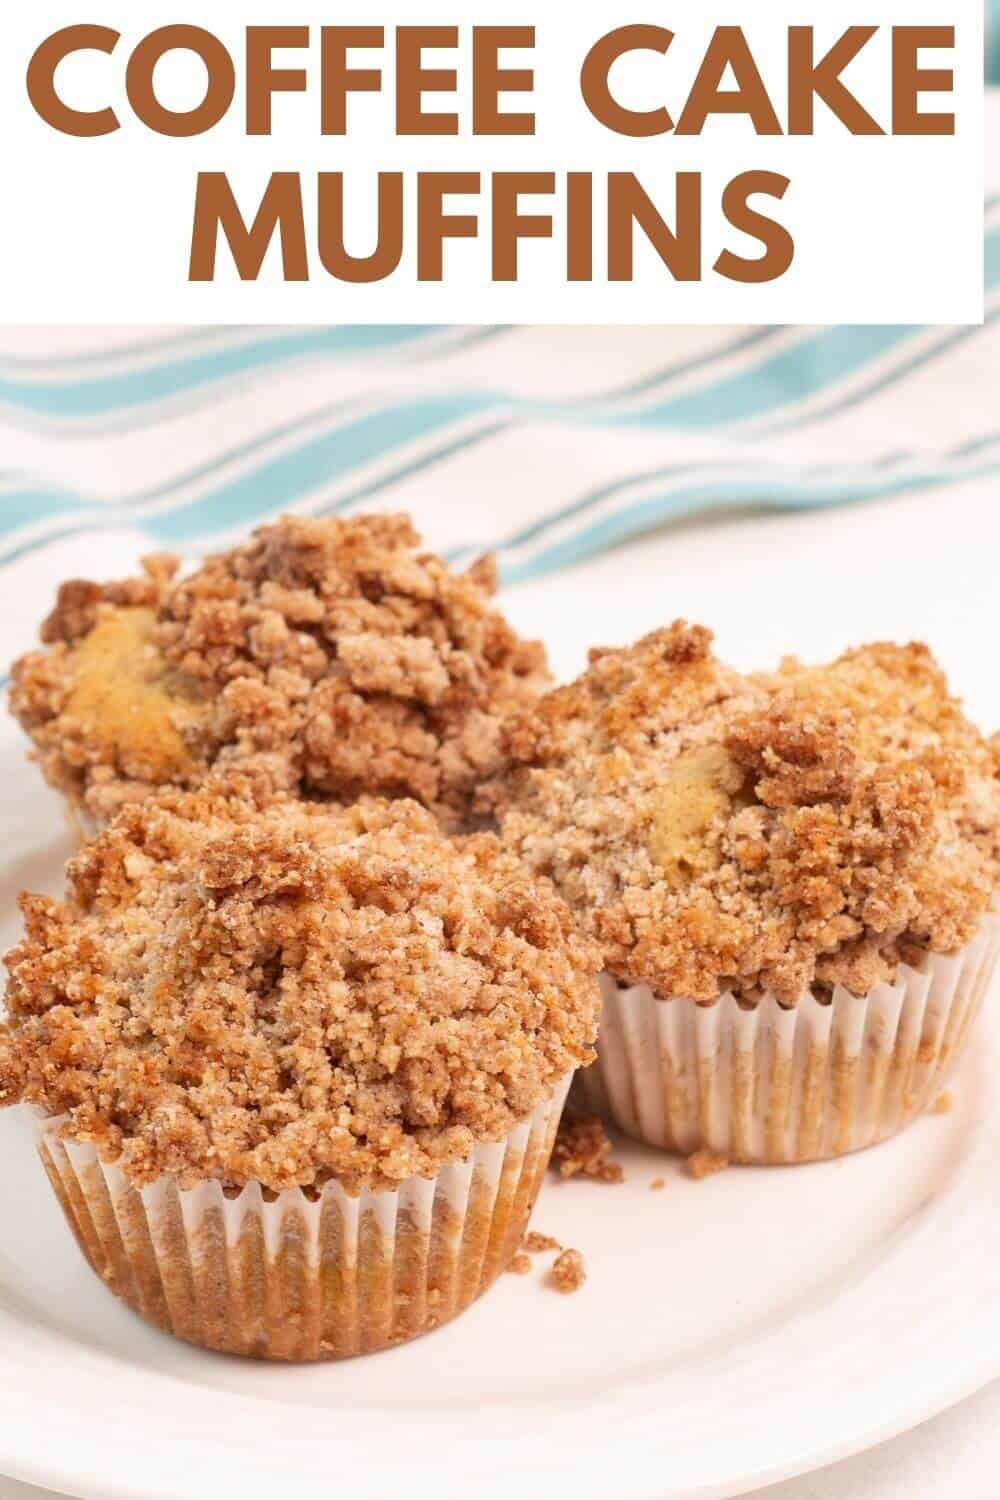 Cinnamon coffee cake muffins with title text.